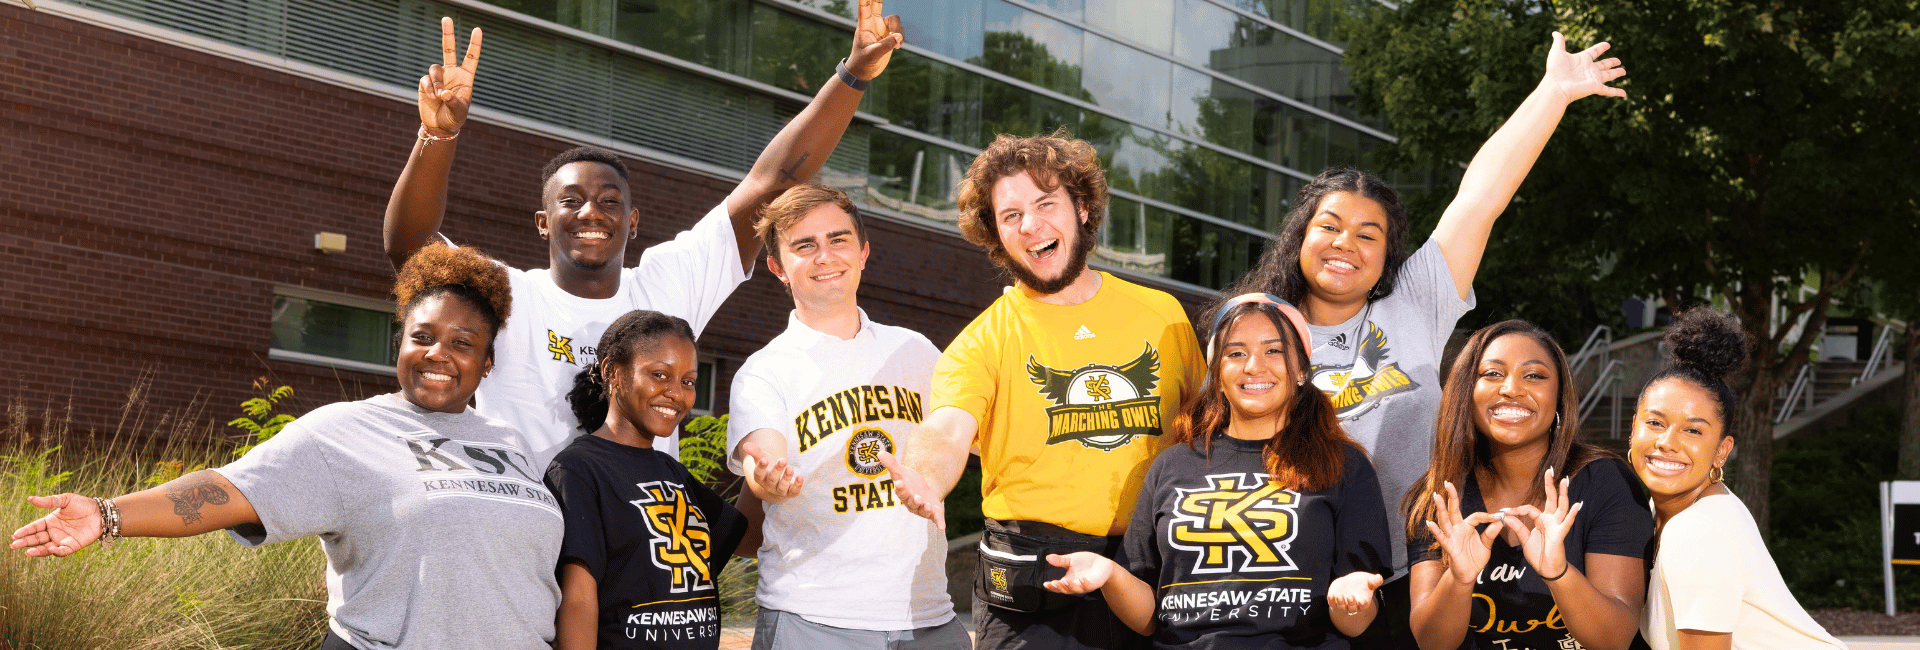 A group of Kennesaw State University students